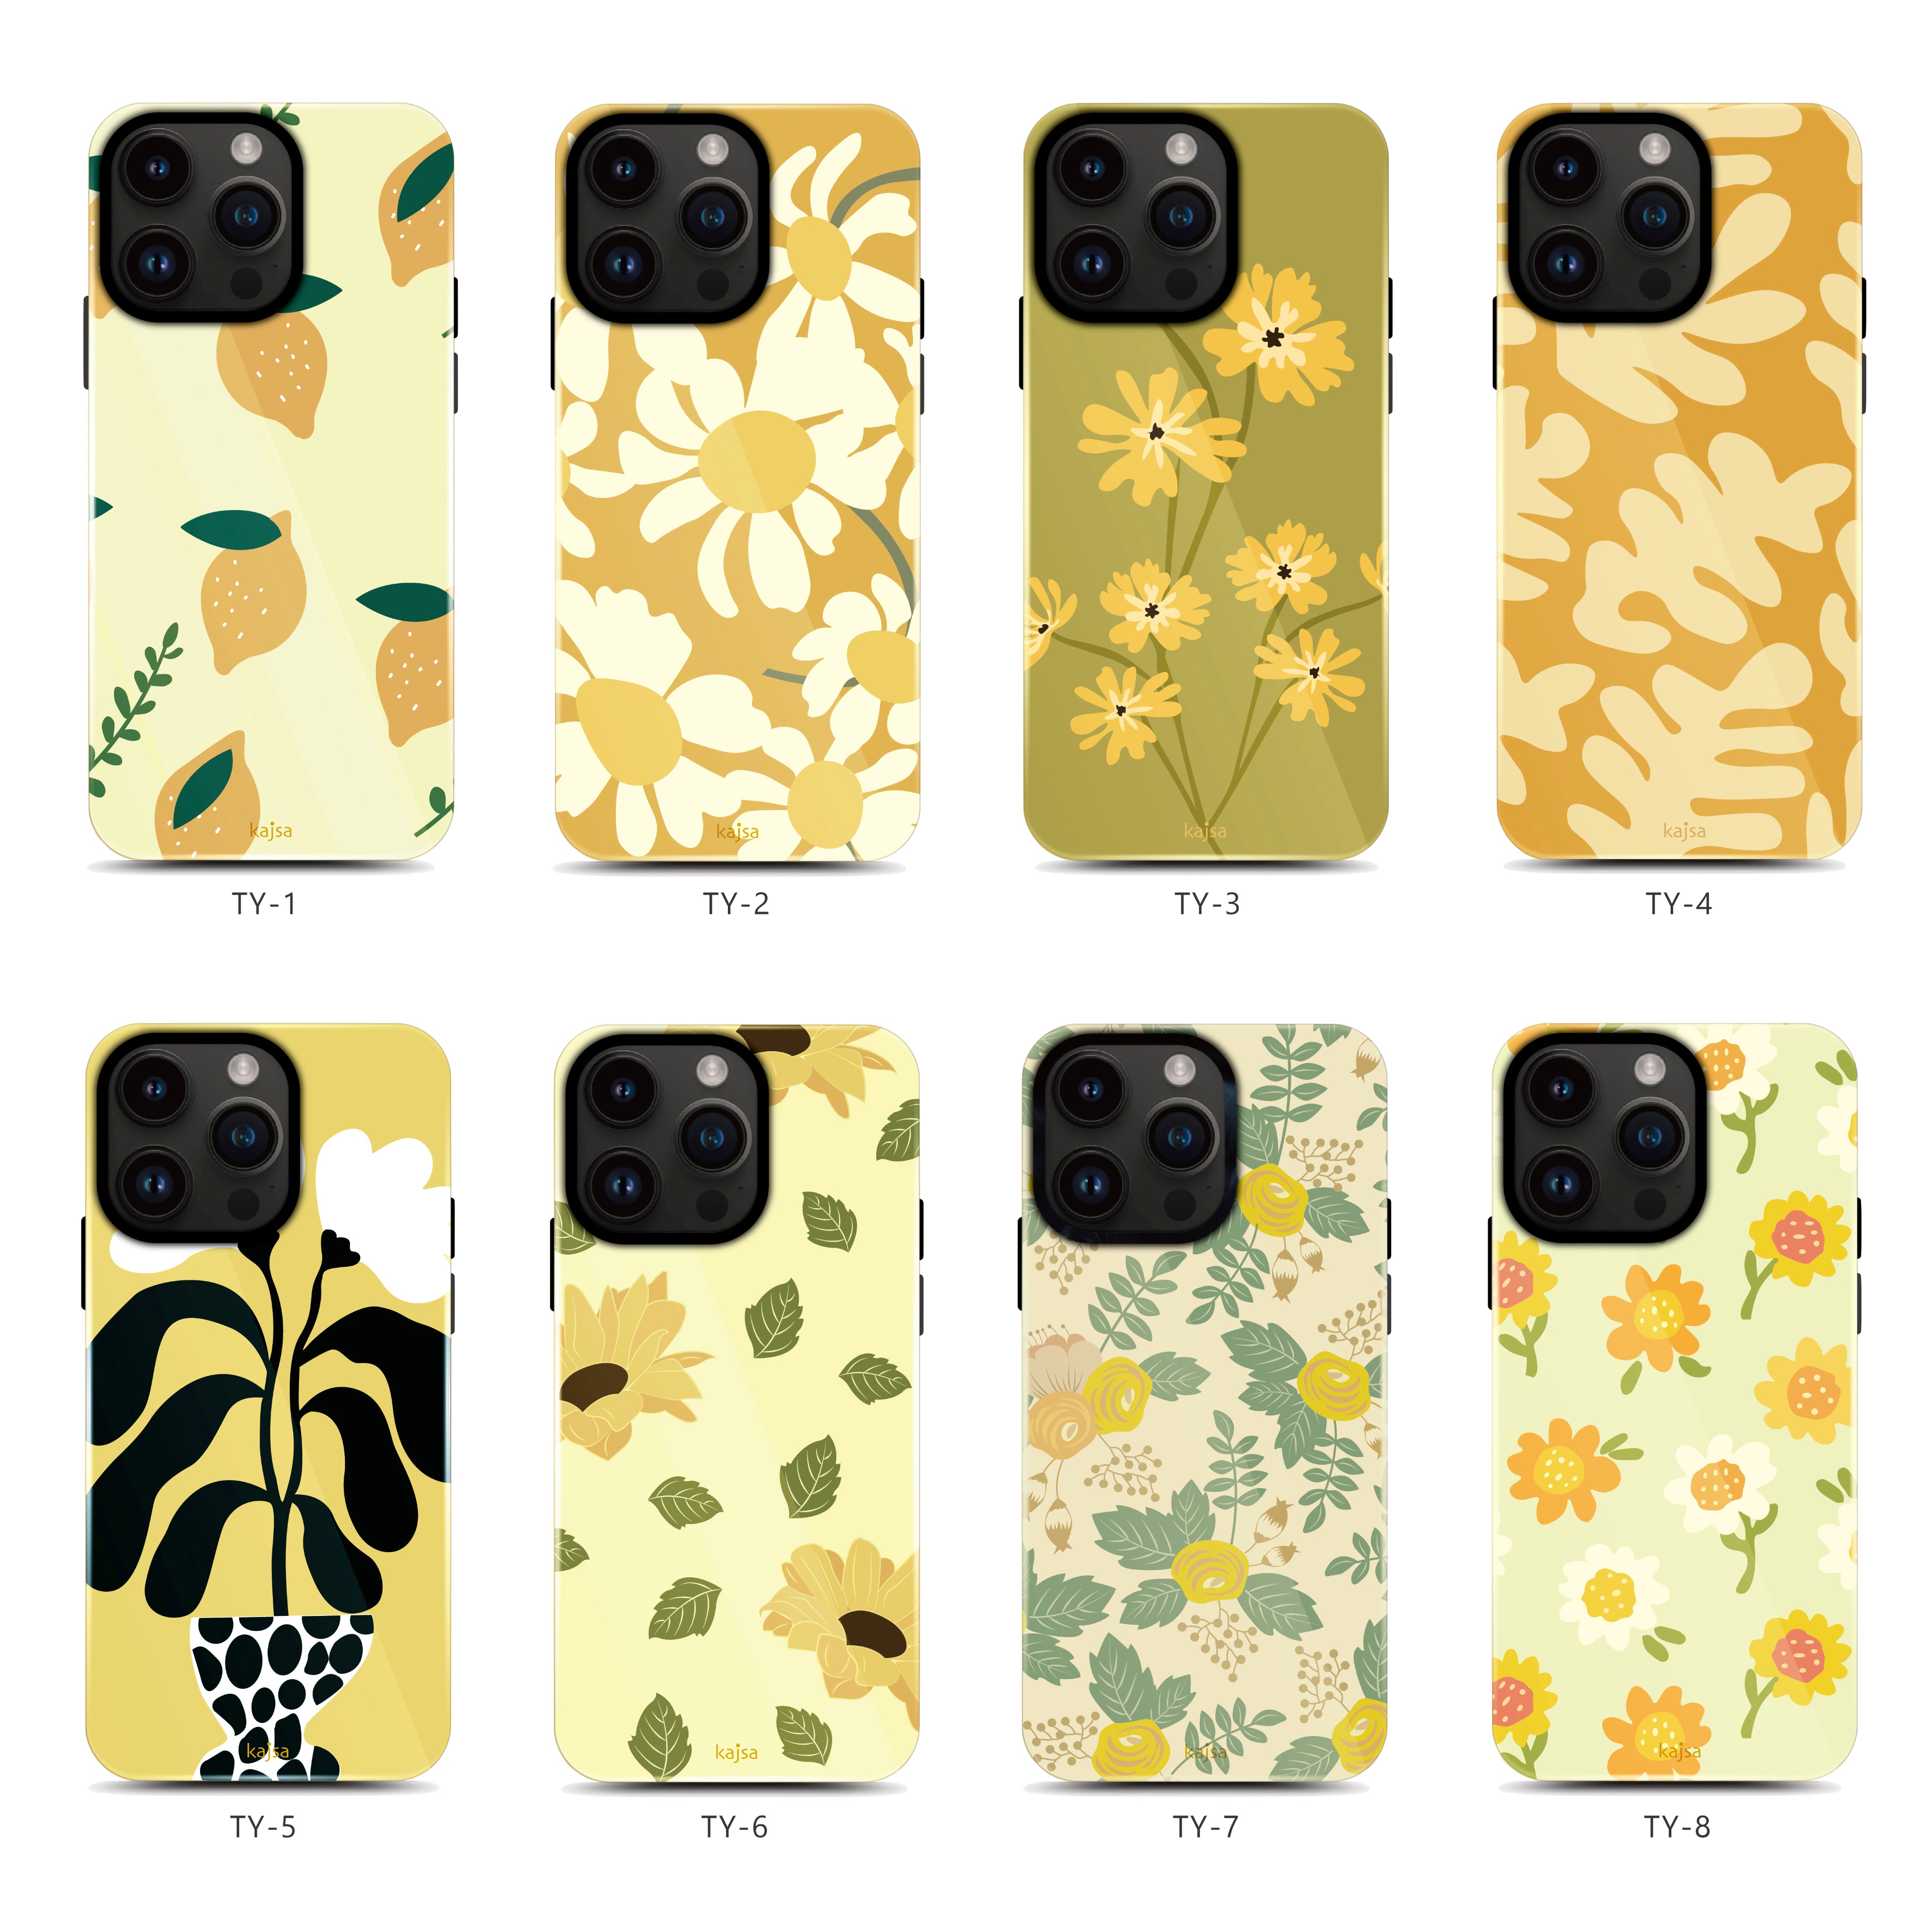 Floral Collection - Tropical Back Base for iPhone 14 (TY3)-Phone Case- phone case - phone cases- phone cover- iphone cover- iphone case- iphone cases- leather case- leather cases- DIYCASE - custom case - leather cover - hand strap case - croco pattern case - snake pattern case - carbon fiber phone case - phone case brand - unique phone case - high quality - phone case brand - protective case - buy phone case hong kong - online buy phone case - iphone‎手機殼 - 客製化手機殼 - samsung ‎手機殼 - 香港手機殼 - 買電話殼